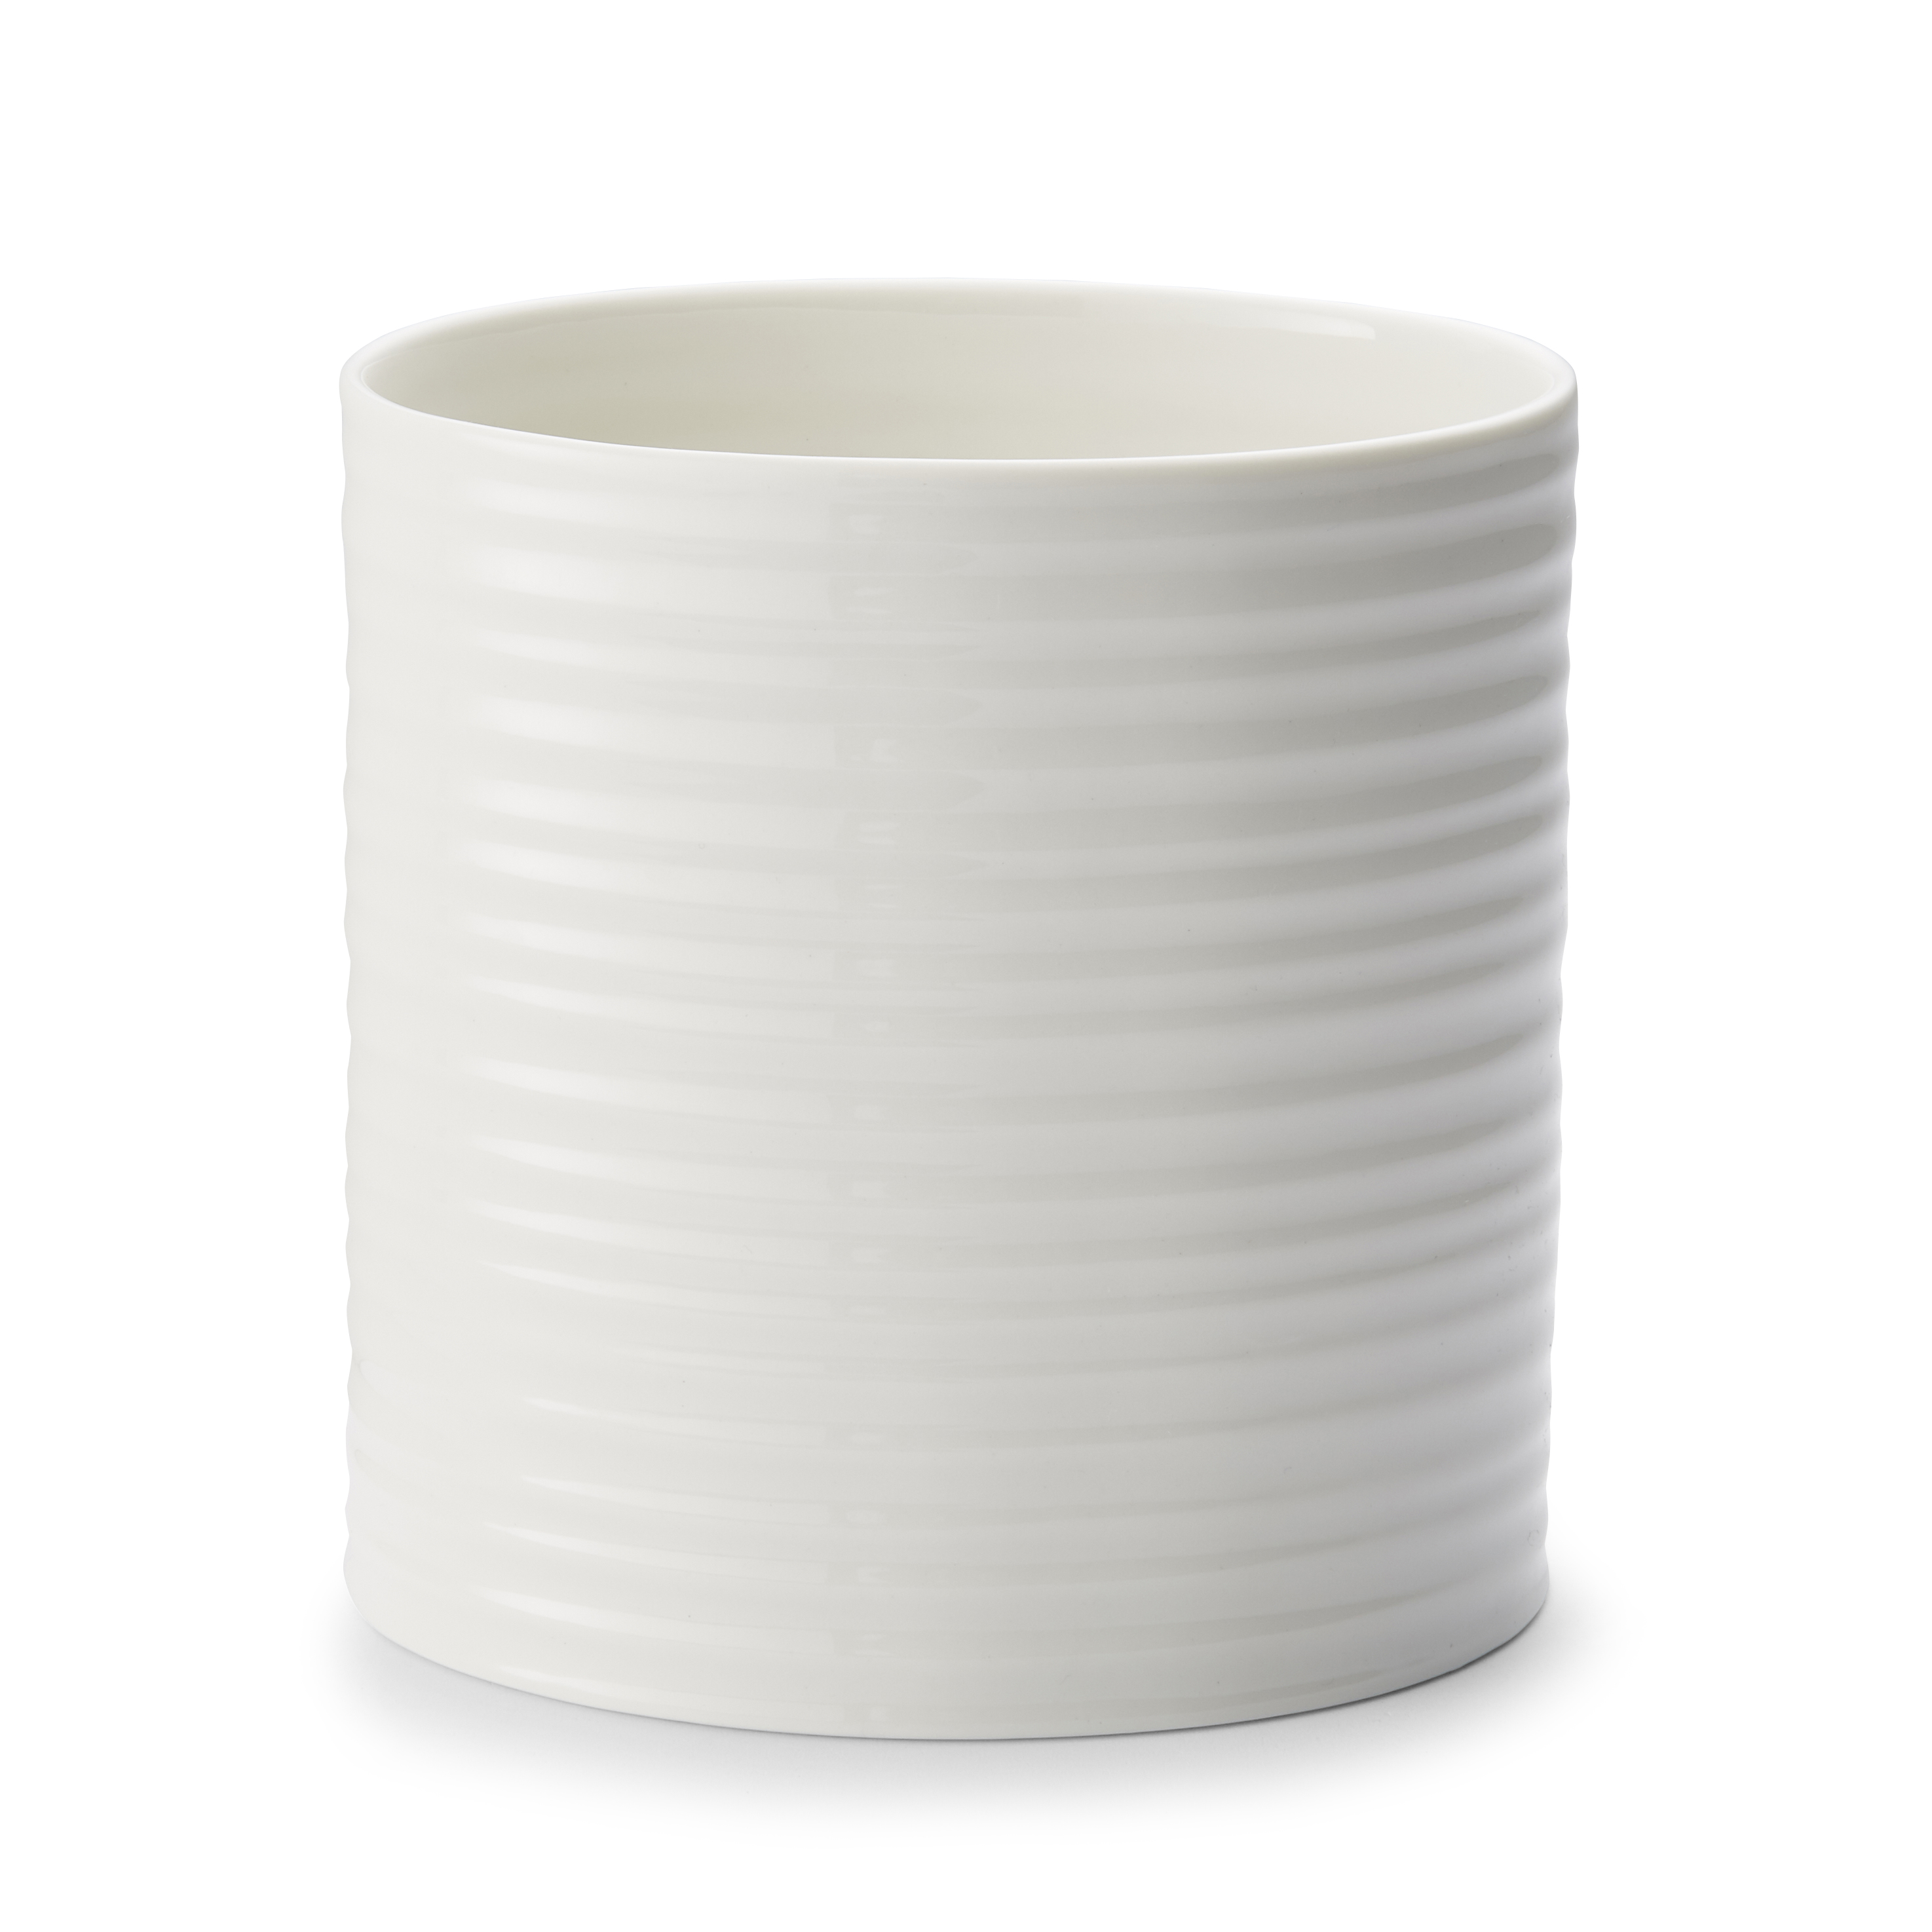 Sophie Conran for Portmeirion White 7.5 Inch Oval Utensil Holder Large image number null